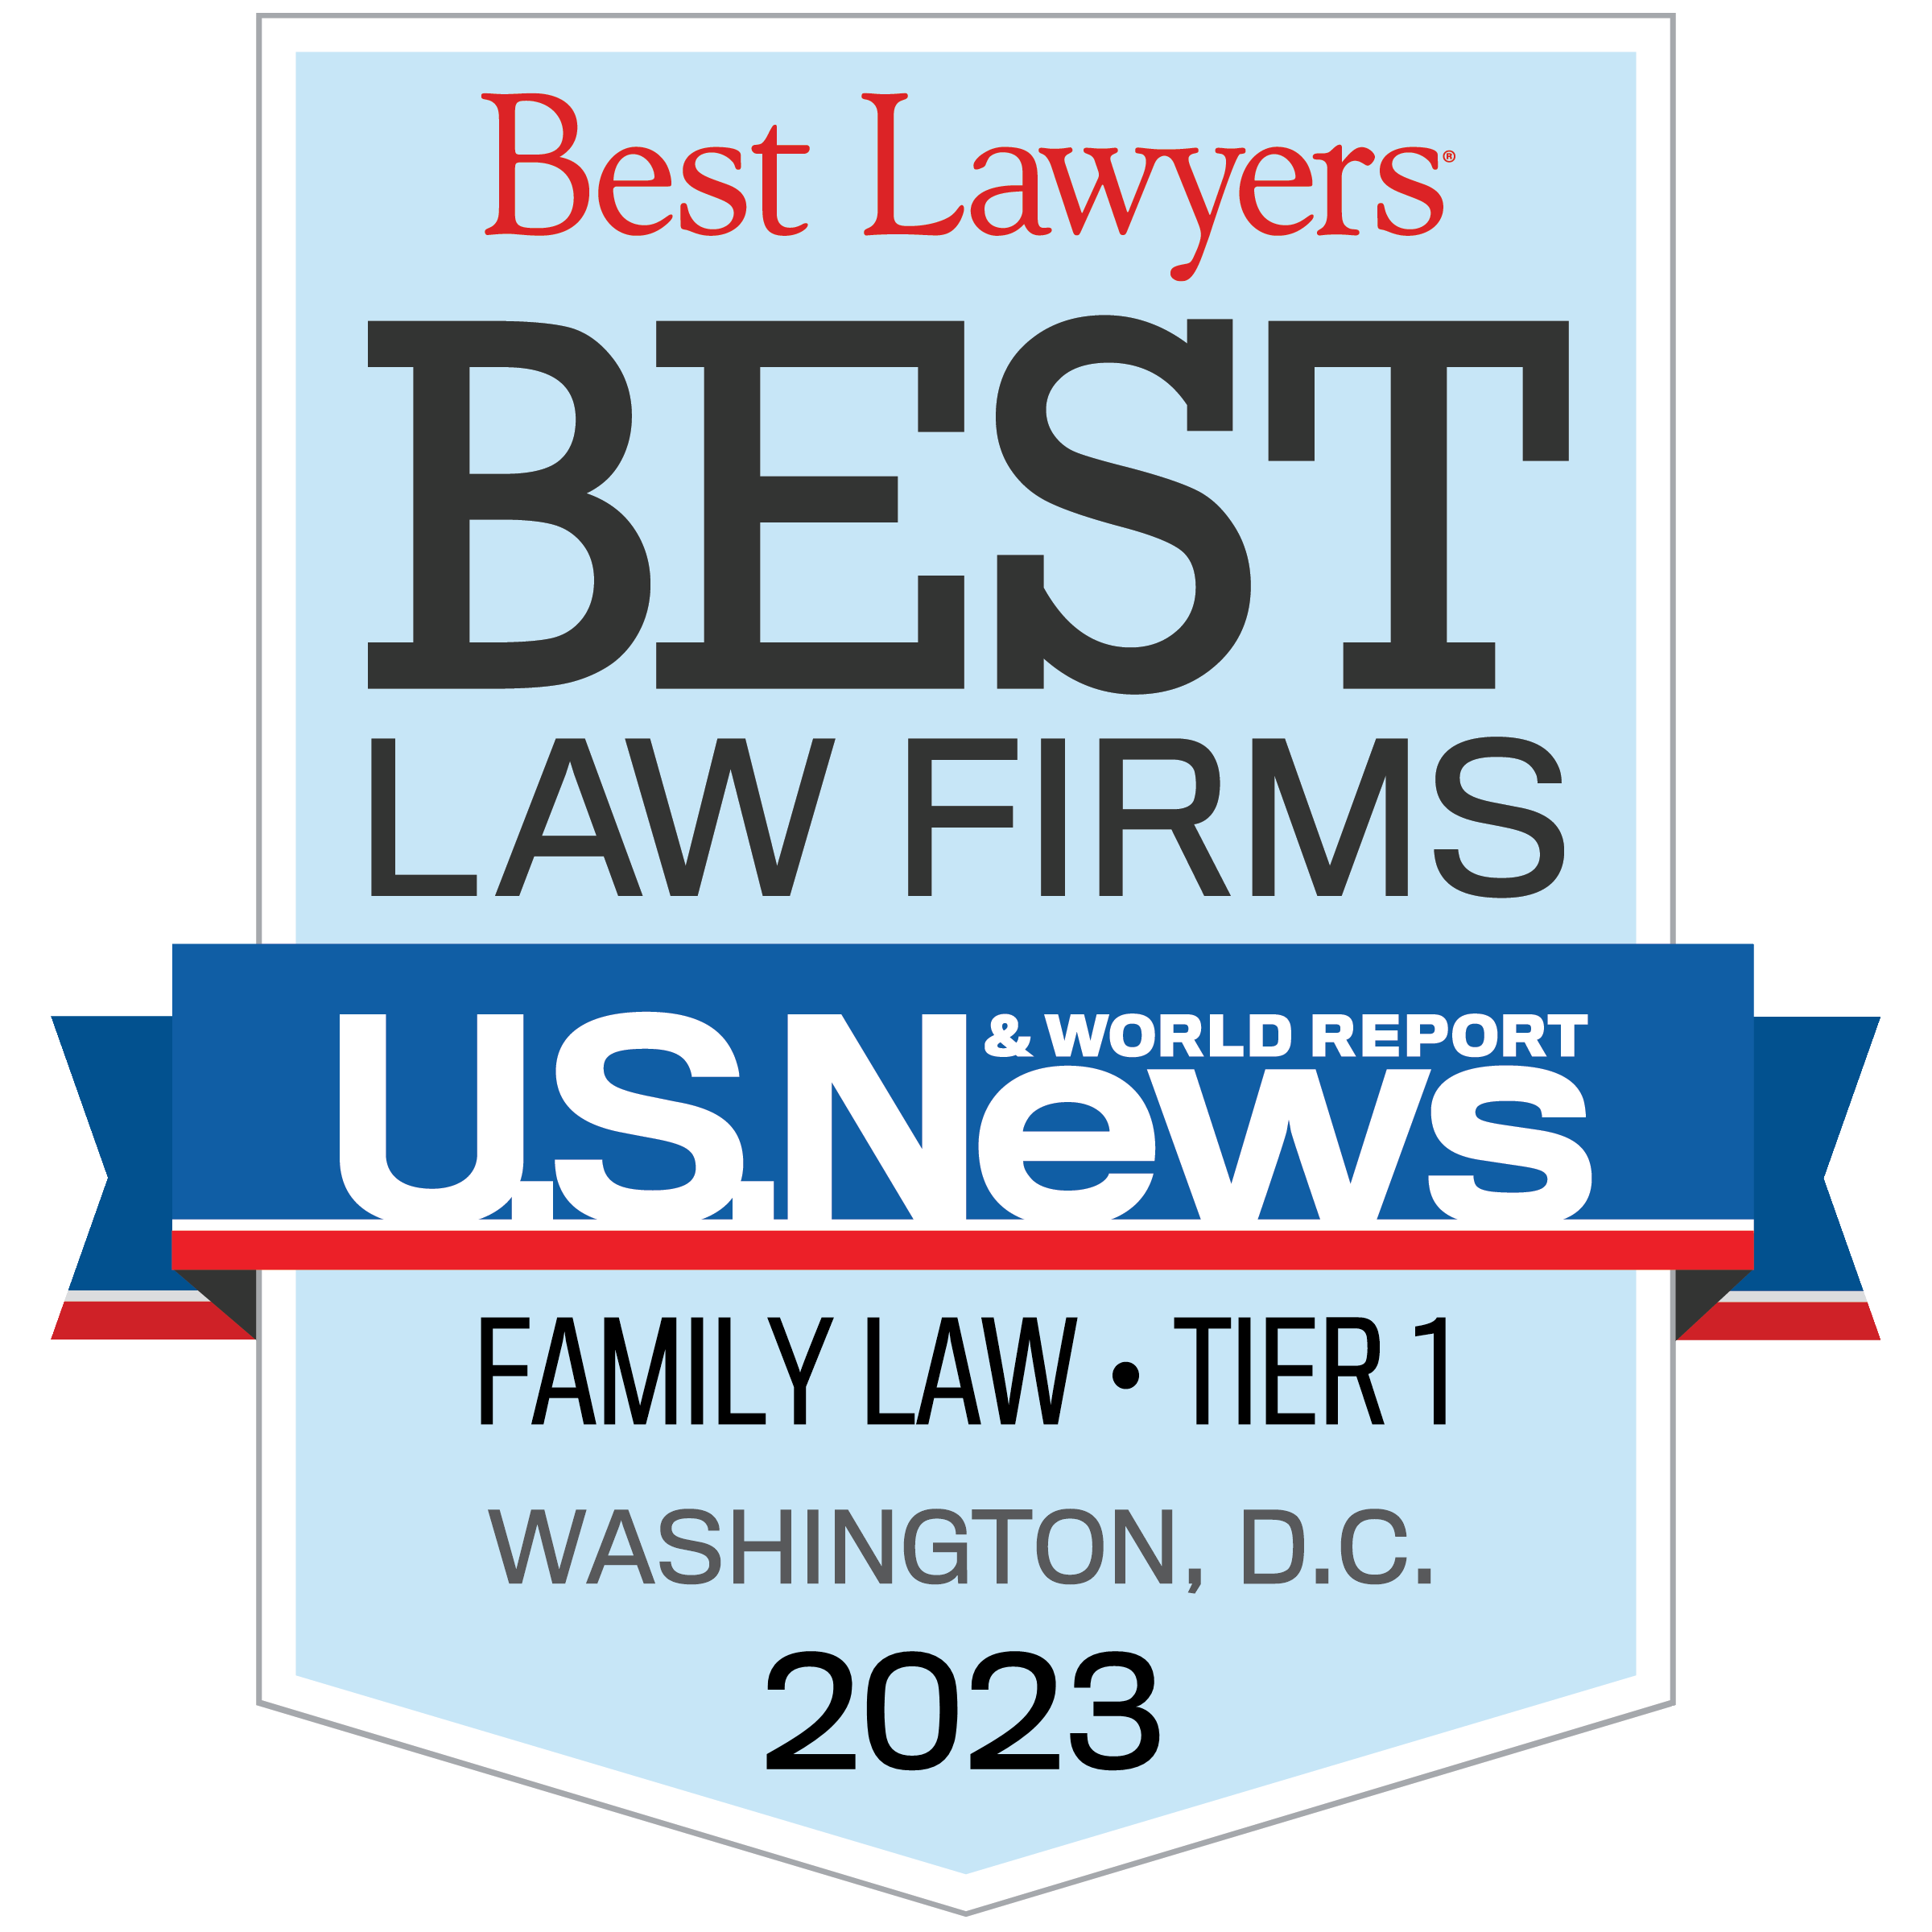 US News/Best Lawyers “Law Firm of the Year” in Family Law – Tier 1, Washington, DC. Badge